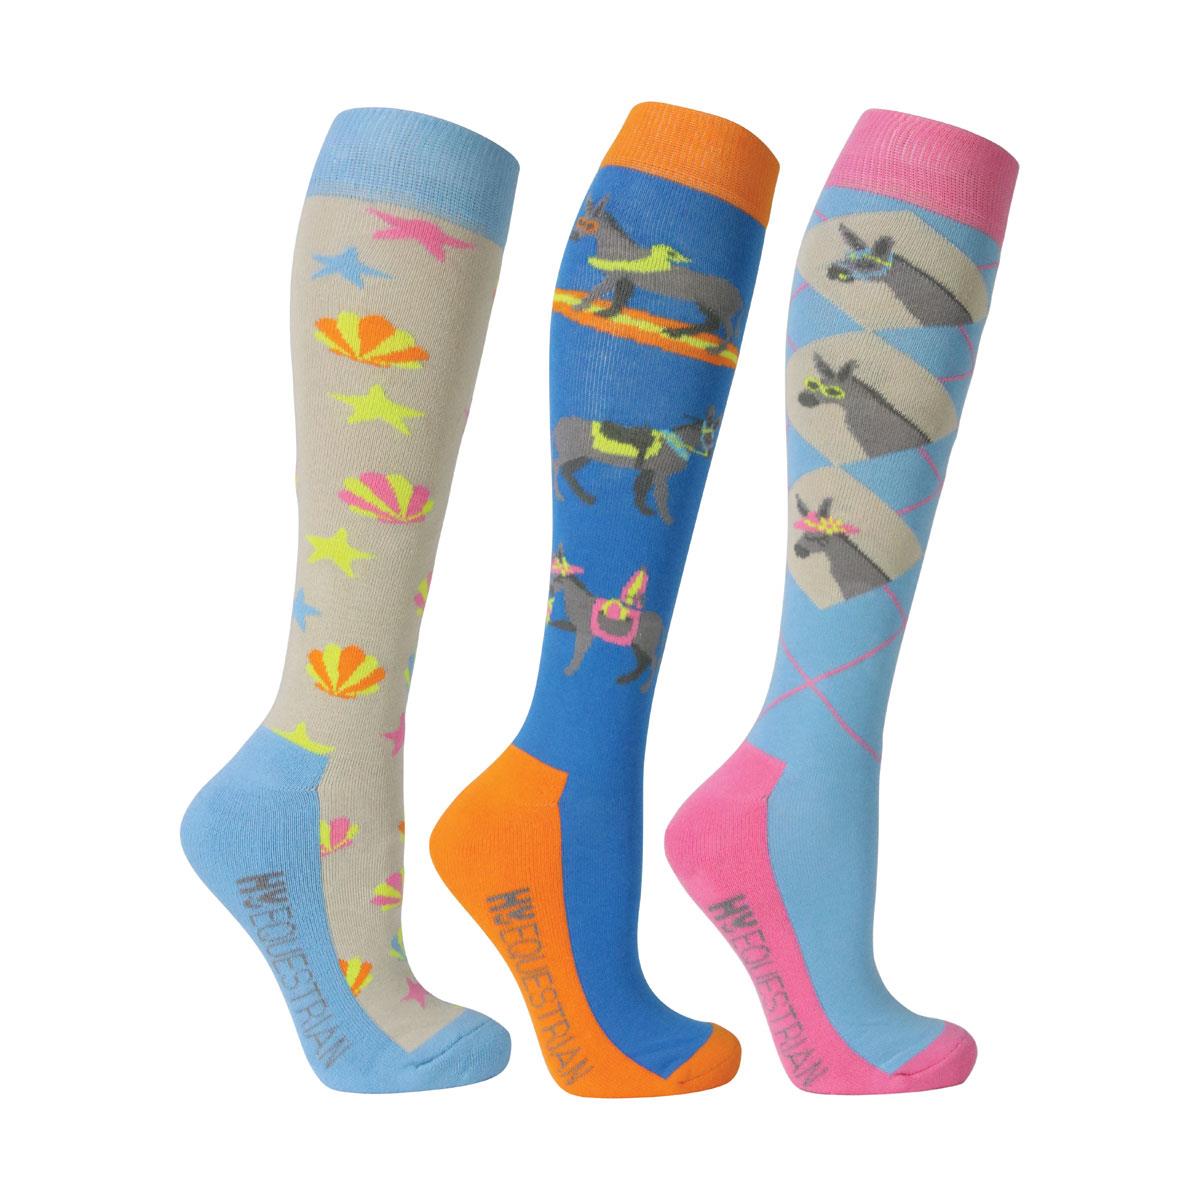 Hy Equestrian Seaside Donkey Horse Riding Socks (Pack of 3) - Just Horse Riders